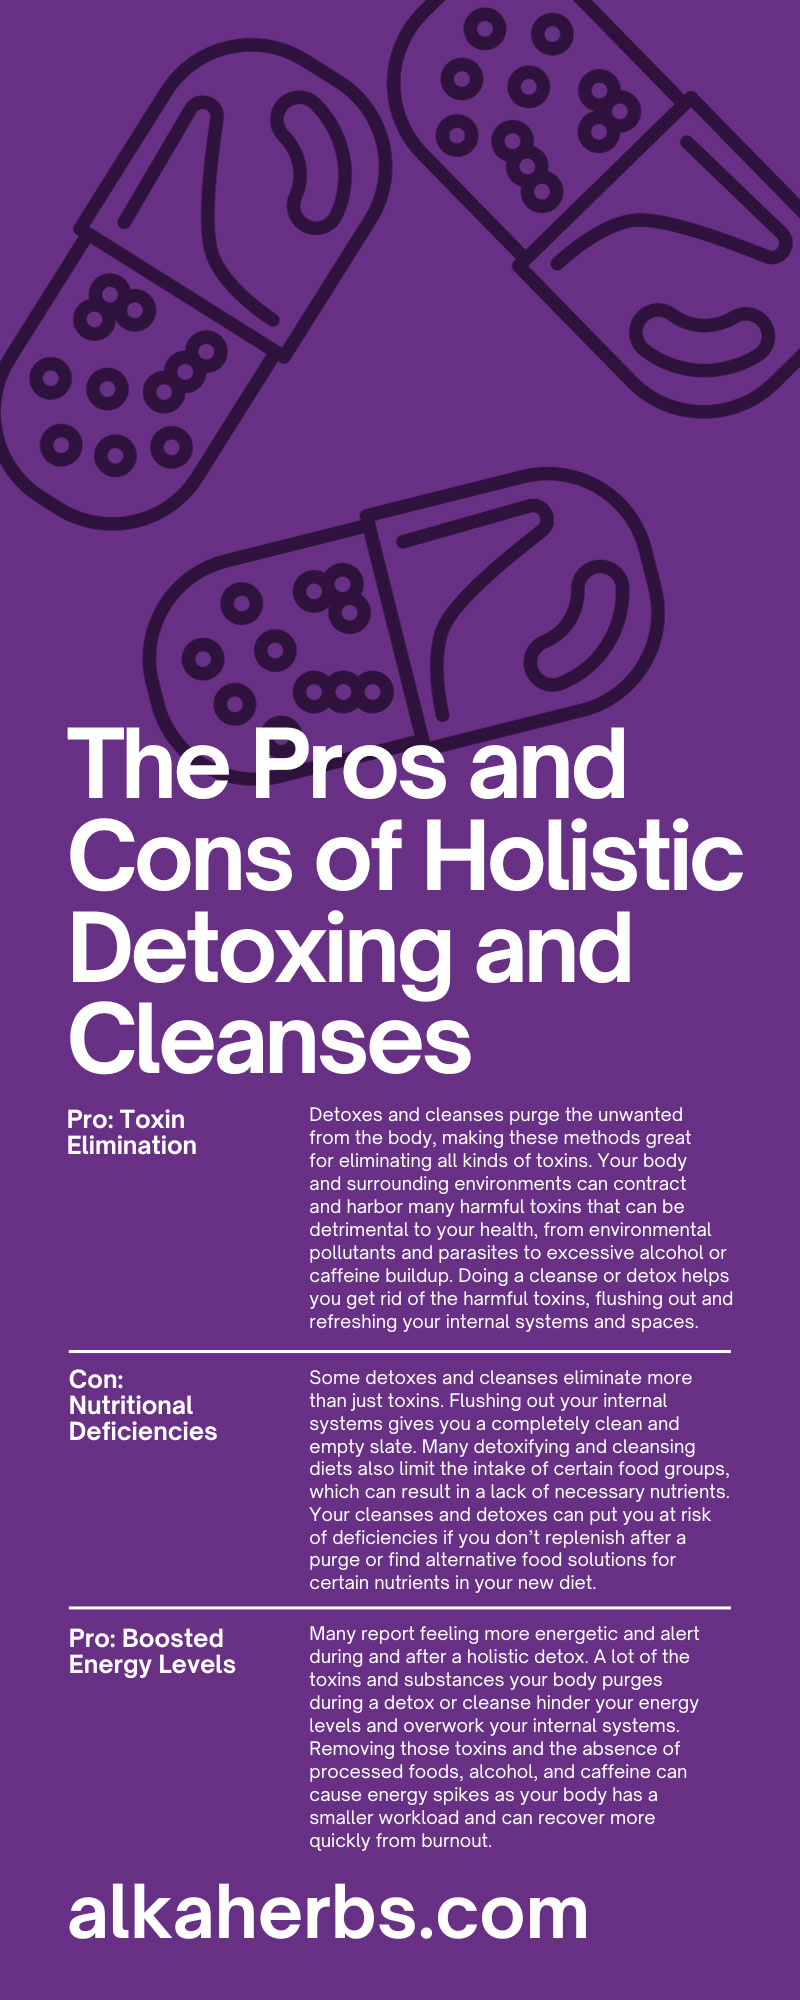 The Pros and Cons of Holistic Detoxing and Cleanses